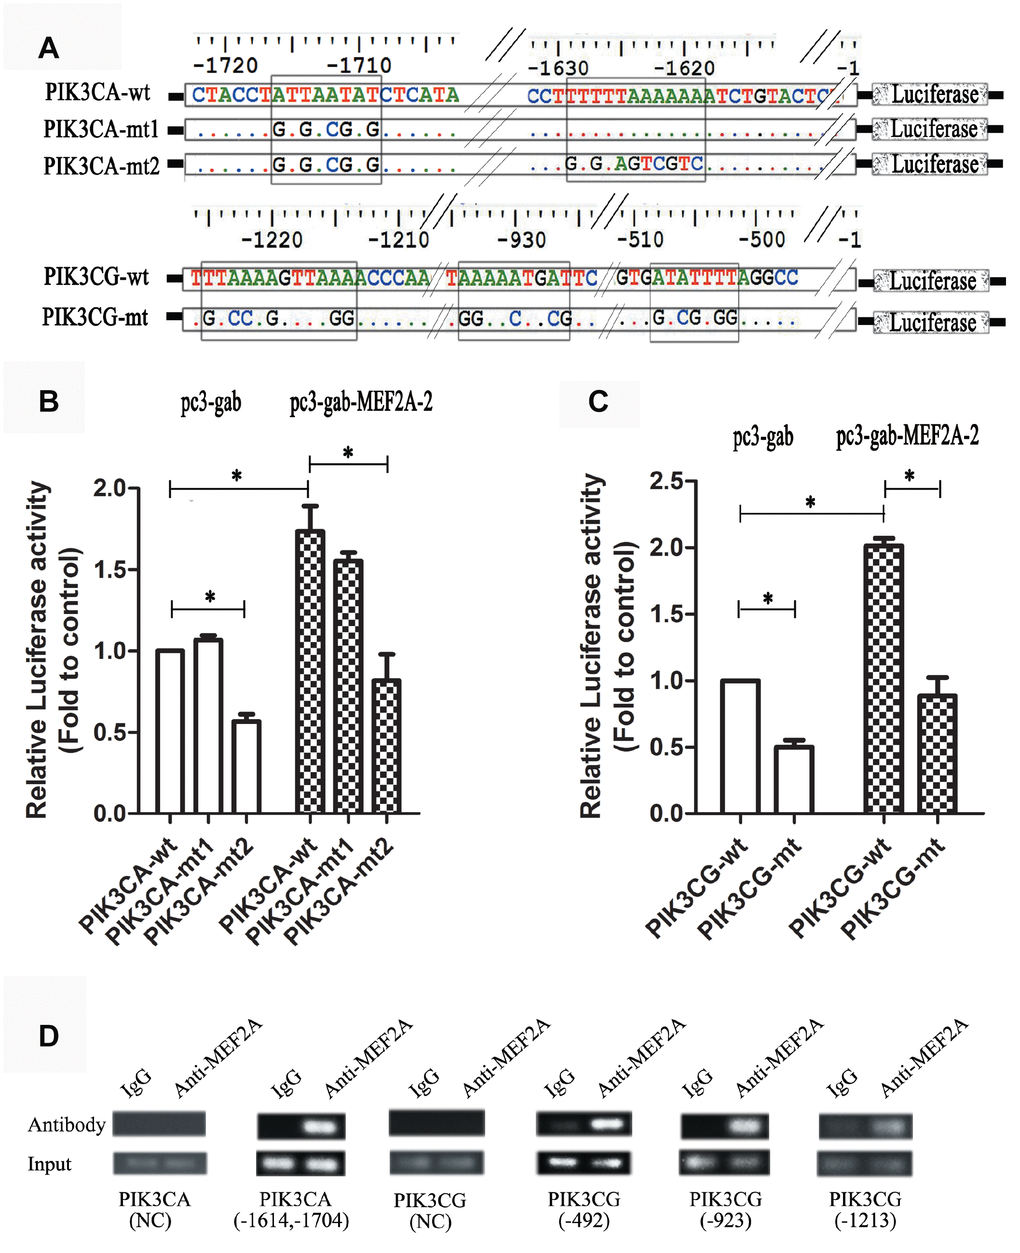 Dual luciferase reporter gene assay and ChIP assay. (A) Strategies for the construction of PIK3CA and PIK3CG promoter vectors including wild type and mutant type (the predicted MEF2 binding sites were mutated). (B and C) PIK3CA and PIK3CG promoter vectors (wild and mutant) were cotransfected into 293T cells with the empty expression vector (pc3-gab) or the overexpression vector of MEF2A (pc3-gab-MEF2A-2), respectively. (D) Chromosome immunoprecipitation assay. NC: Negative control, the PCR primers were designed to be located away from the MEF2 binding site. The numbers indicated the position of the predicted MEF2 binding sites in the promoter region. *, P 